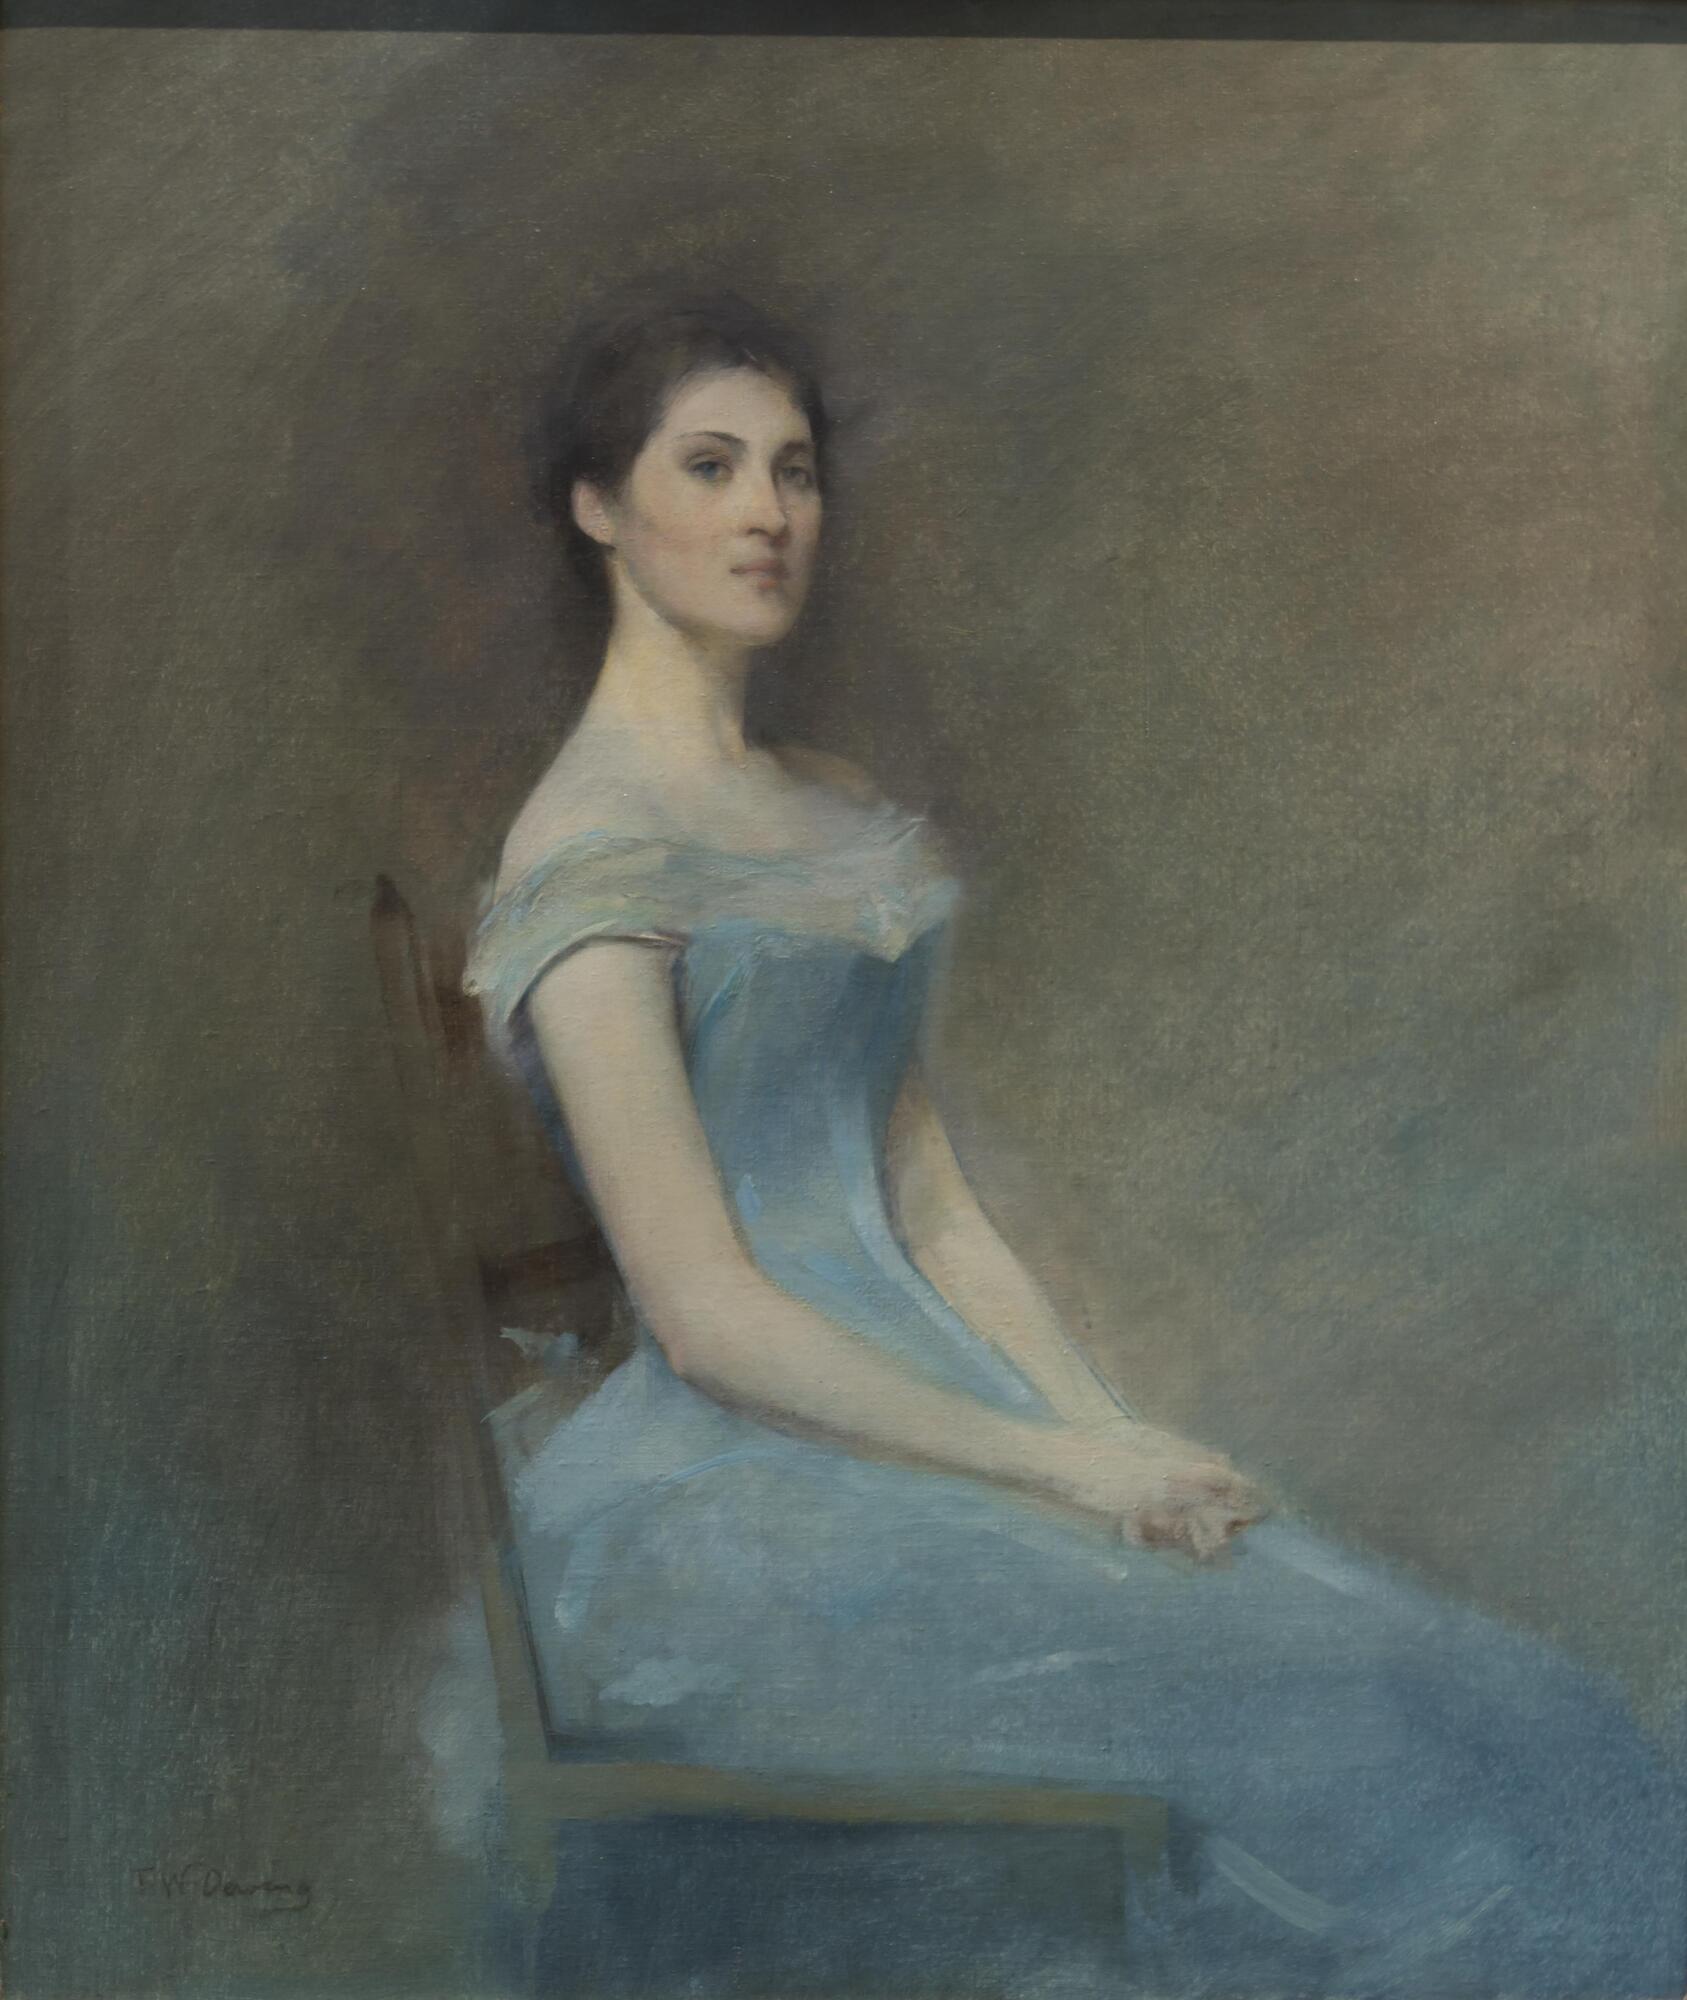 Portrait of a woman with dark hair and fair skin seated in a chair wearing a blue dress amid a sparse background of blues, greens, and browns; her body is positioned at an angle towards the right, while she looks directly out at the viewer.